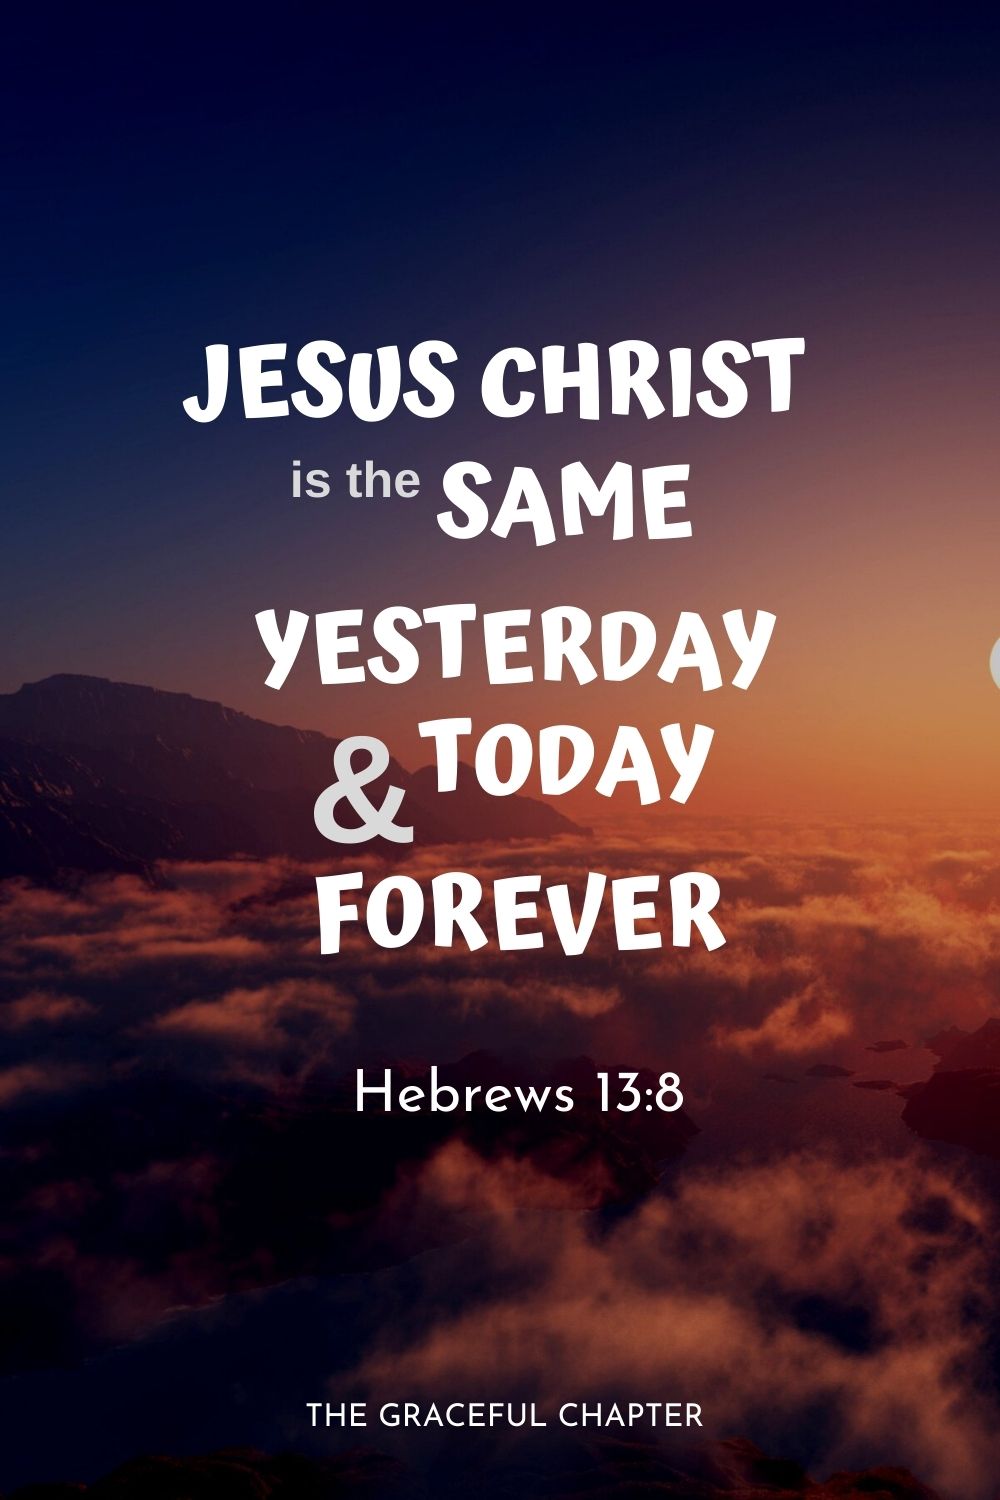 Jesus Christ is the same yesterday and today and forever.